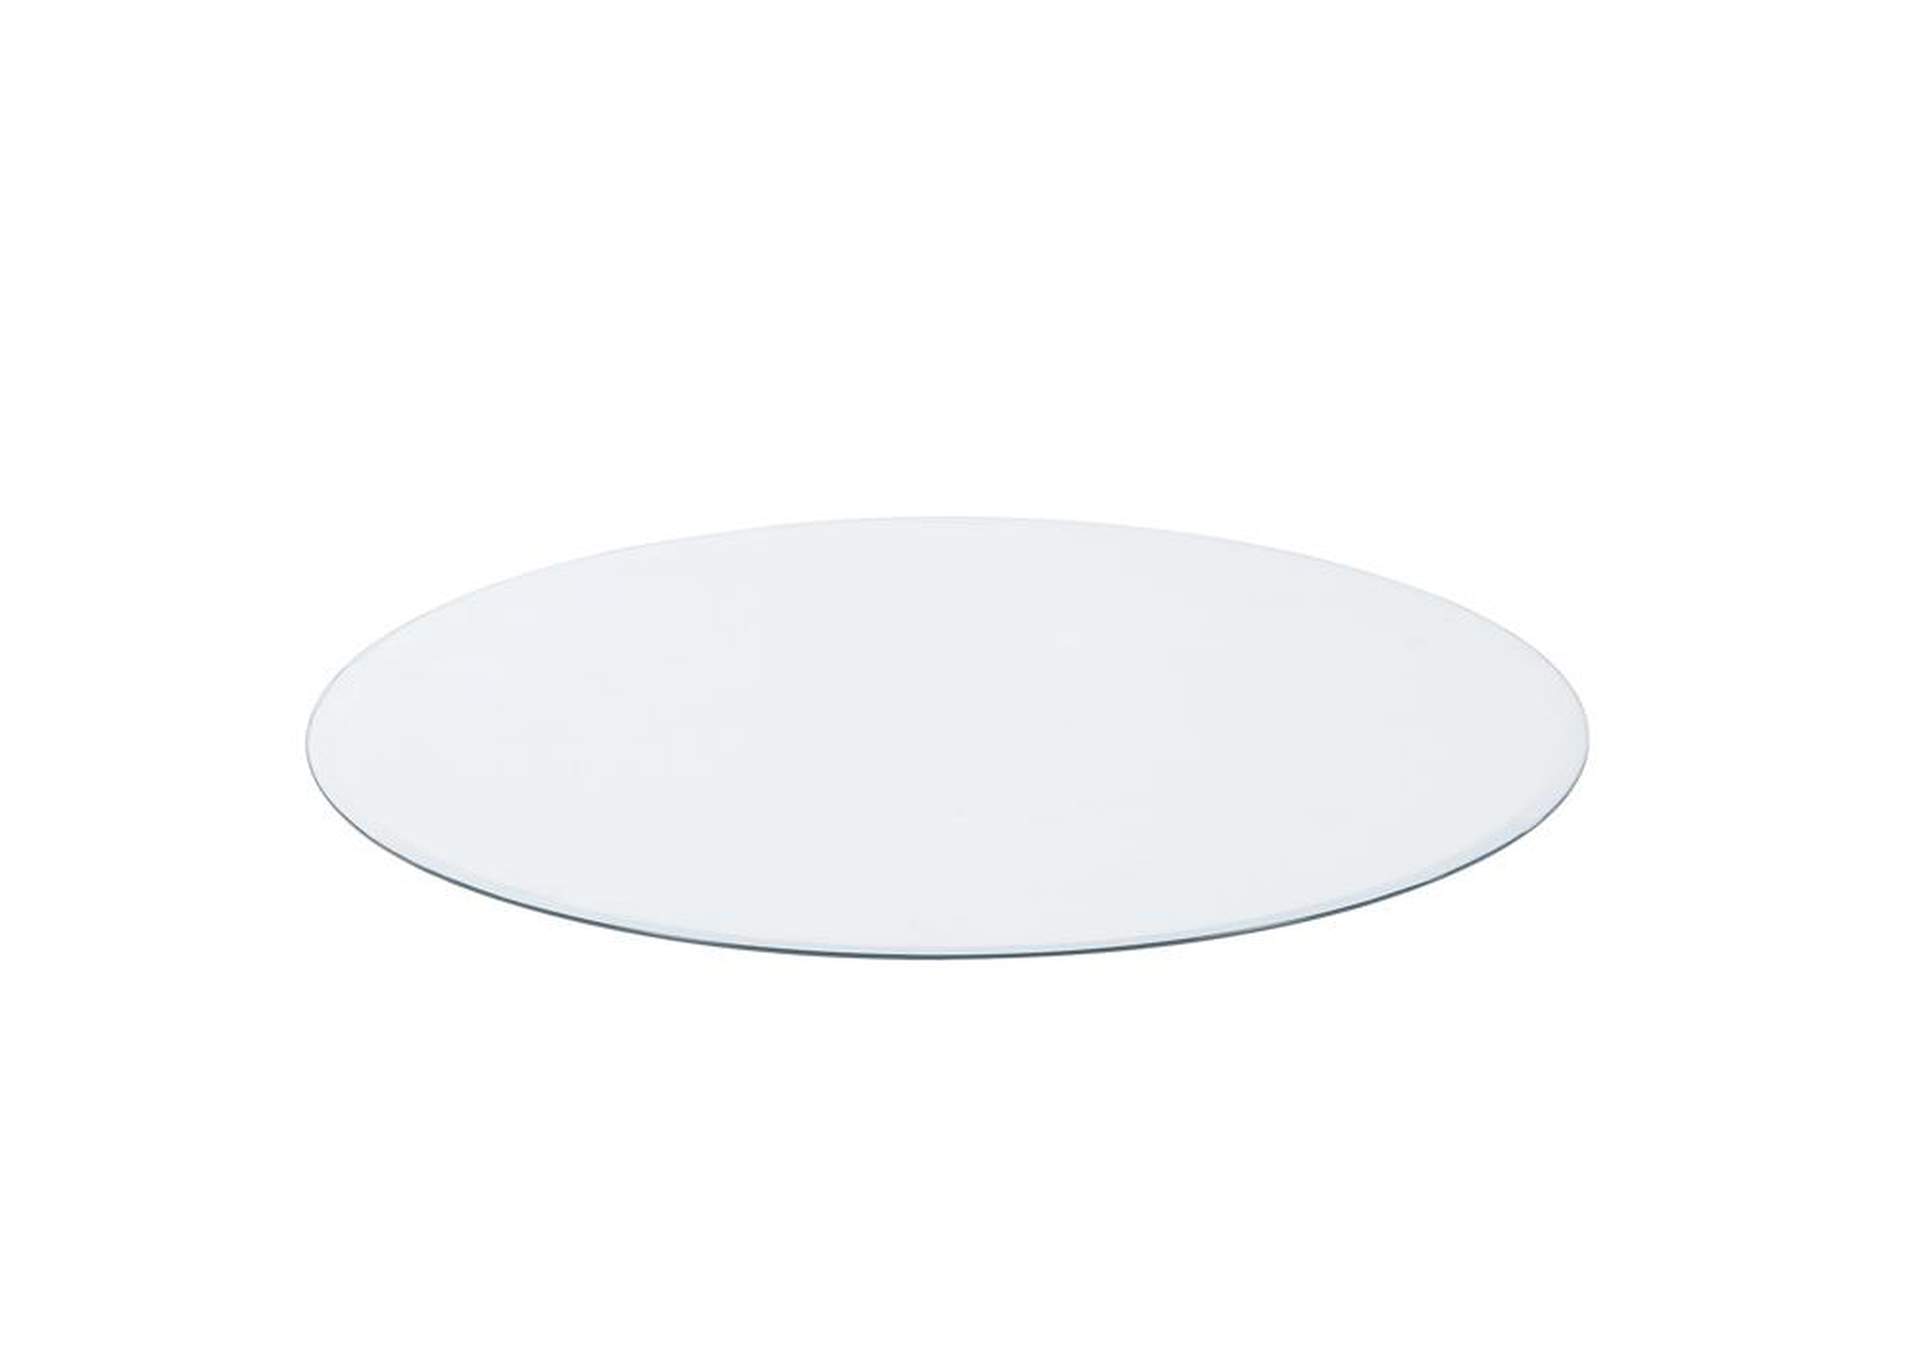 54" Round Glass Table Top Clear,Coaster Furniture